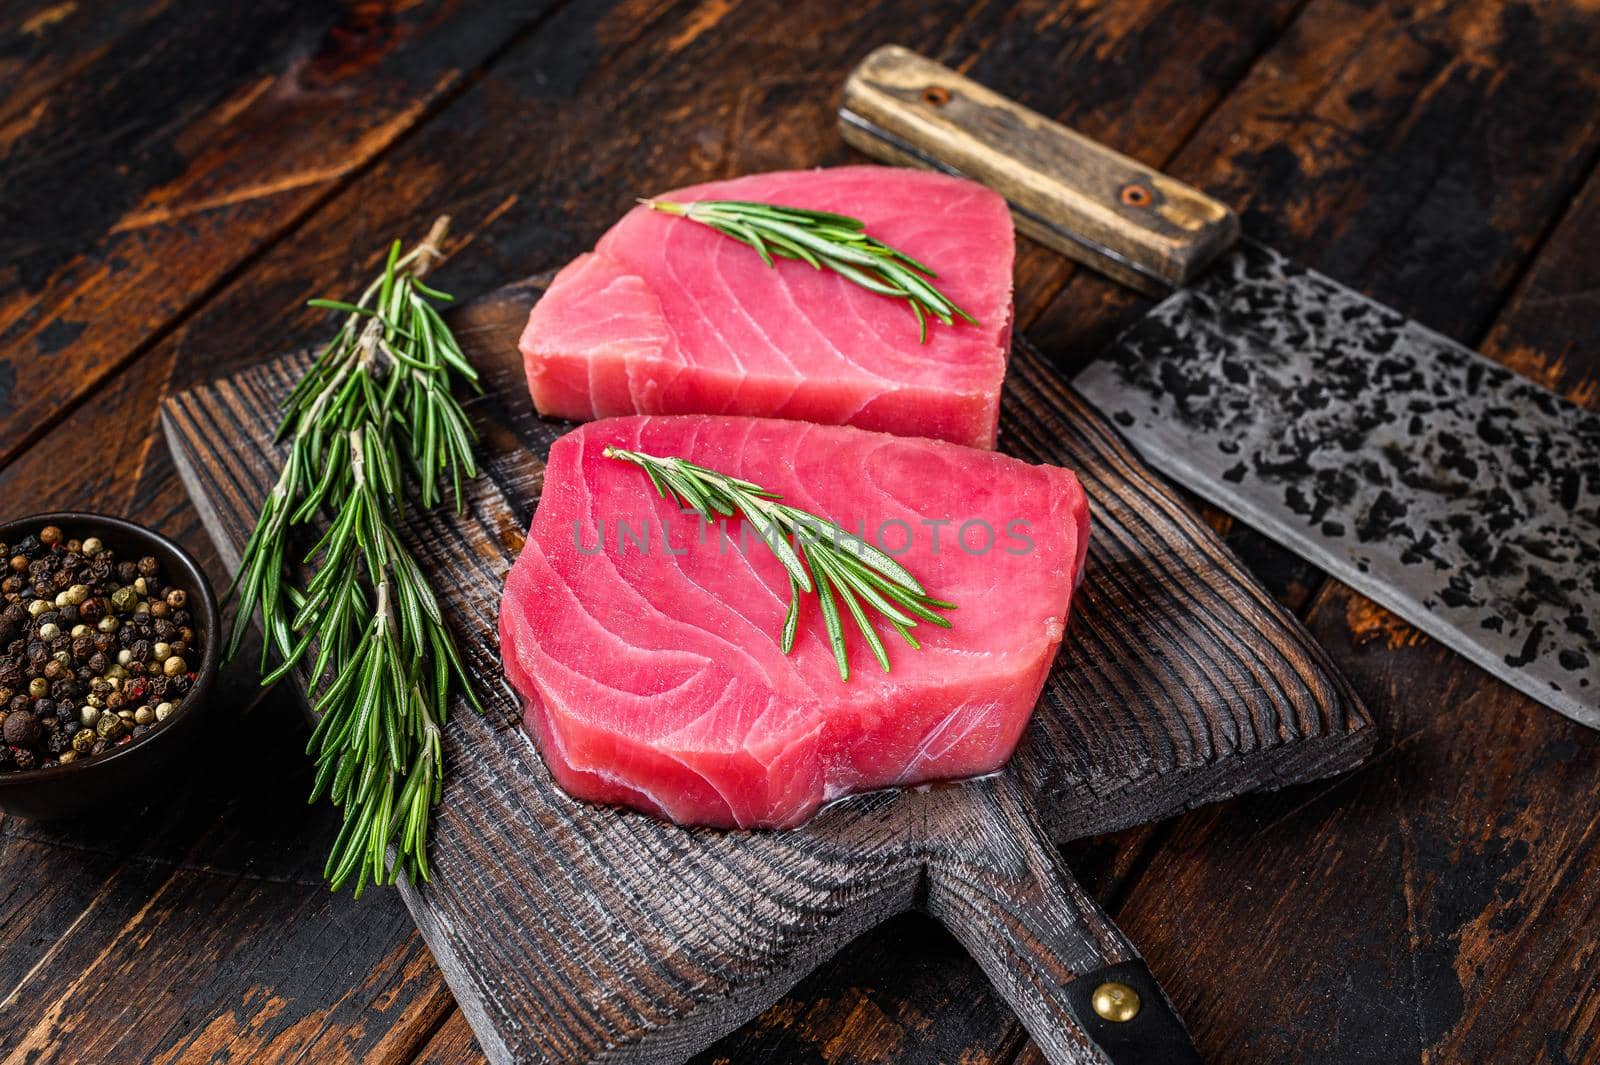 Raw tuna steaks on a wooden cutting Board with cleaver. Dark wooden background. Top view by Composter